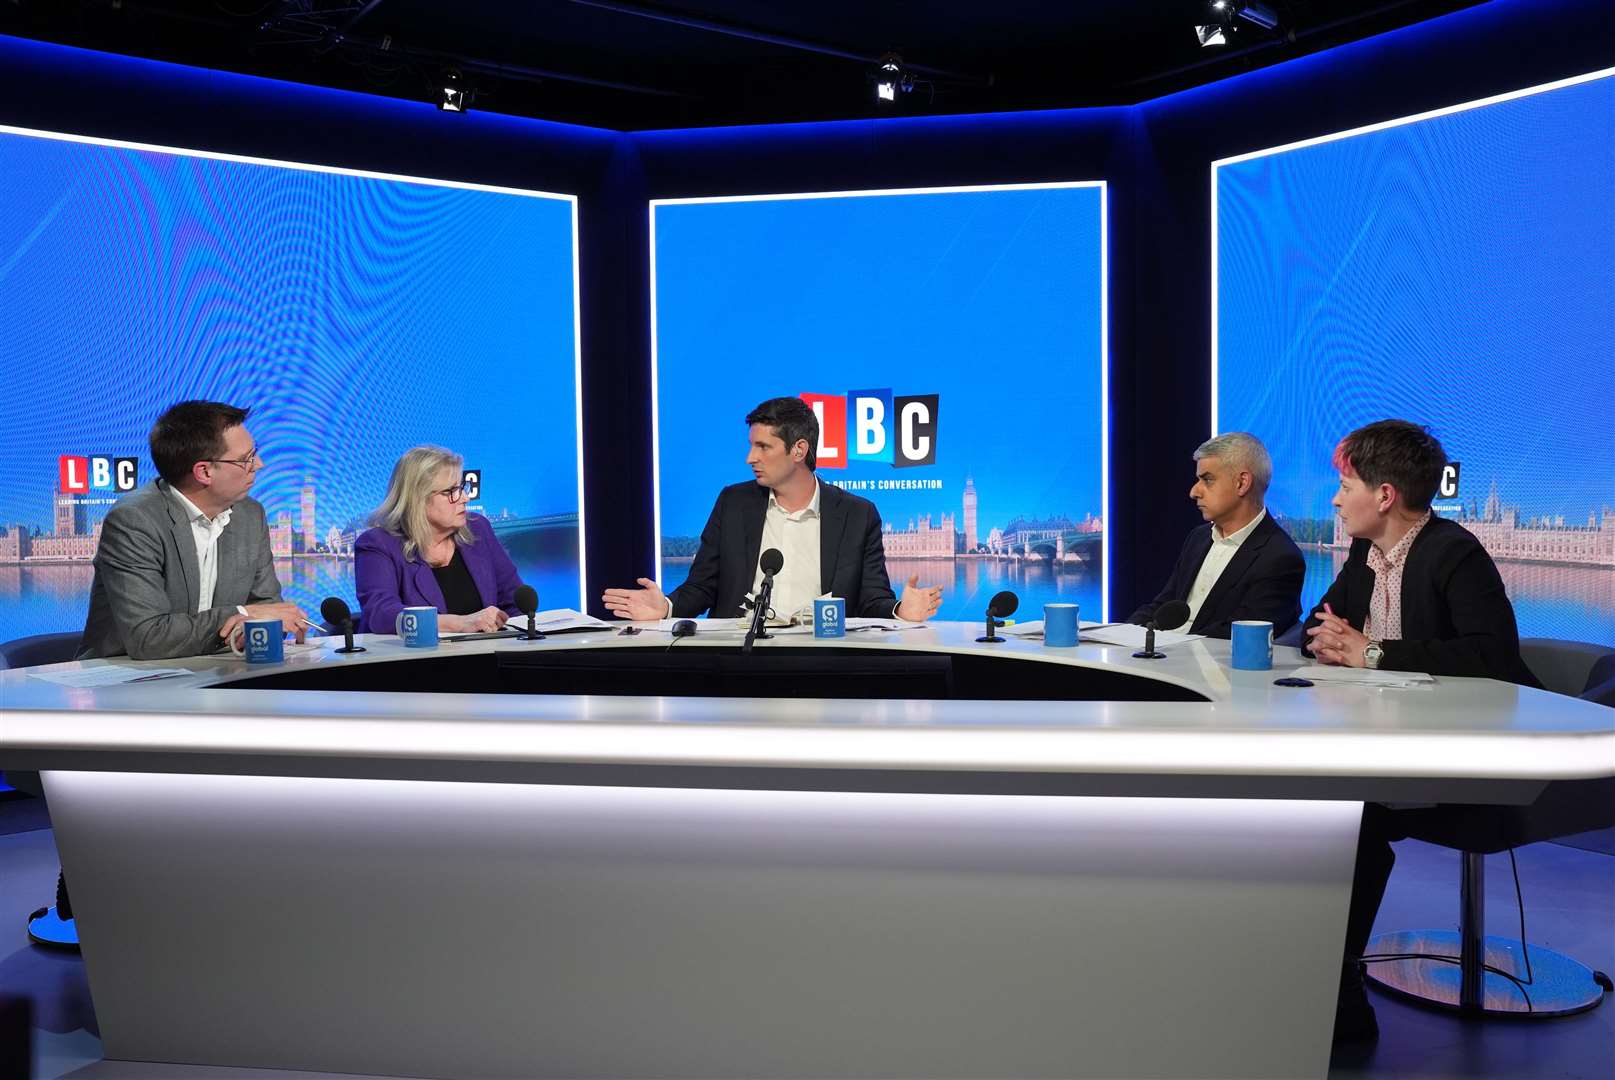 London mayoral candidates Liberal Democrat candidate Rob Blackie (left), Conservative party candidate Susan Hall, current Mayor of London and Labour party candidate Sadiq Khan and Green party candidate Zoe Garbett (right) during the LBC London Mayoral Debate (LBC/PA)